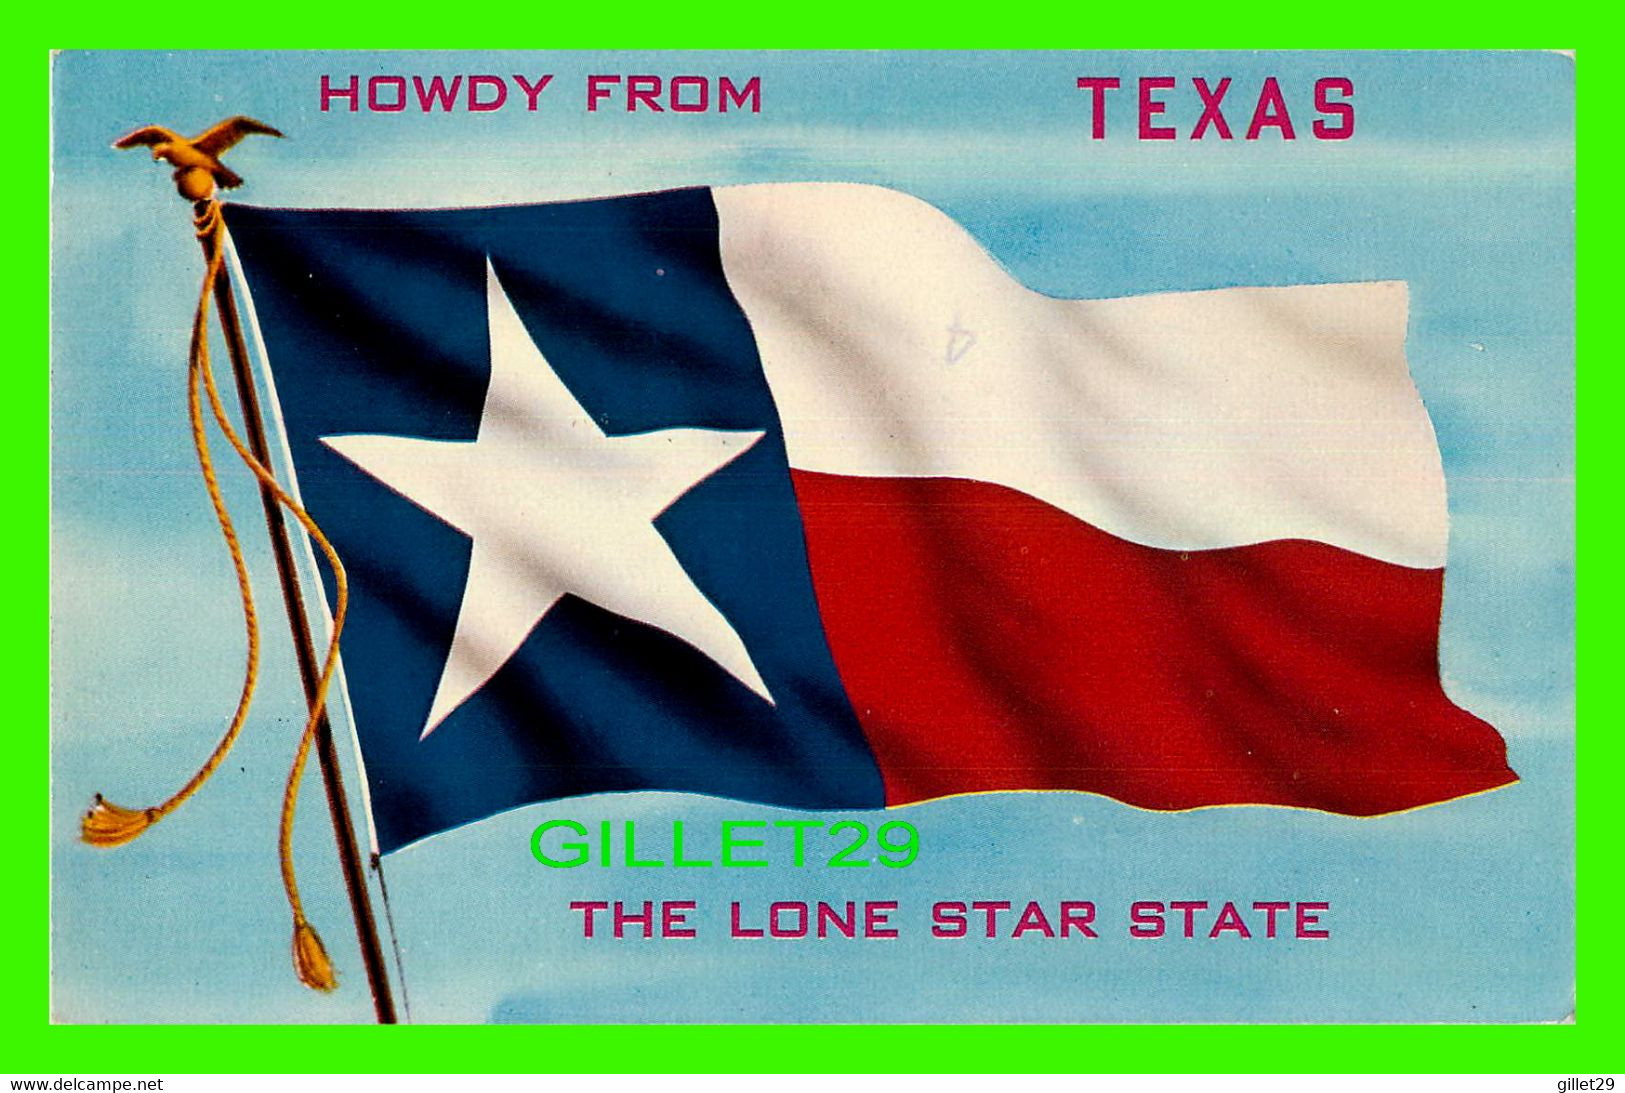 DALLAS, TX - HOWDY FROM TEXAS FLAG - THE LONE STAR STATE - TRAVEL IN 1968 - H.C. CROCKER CO INC - - Dallas